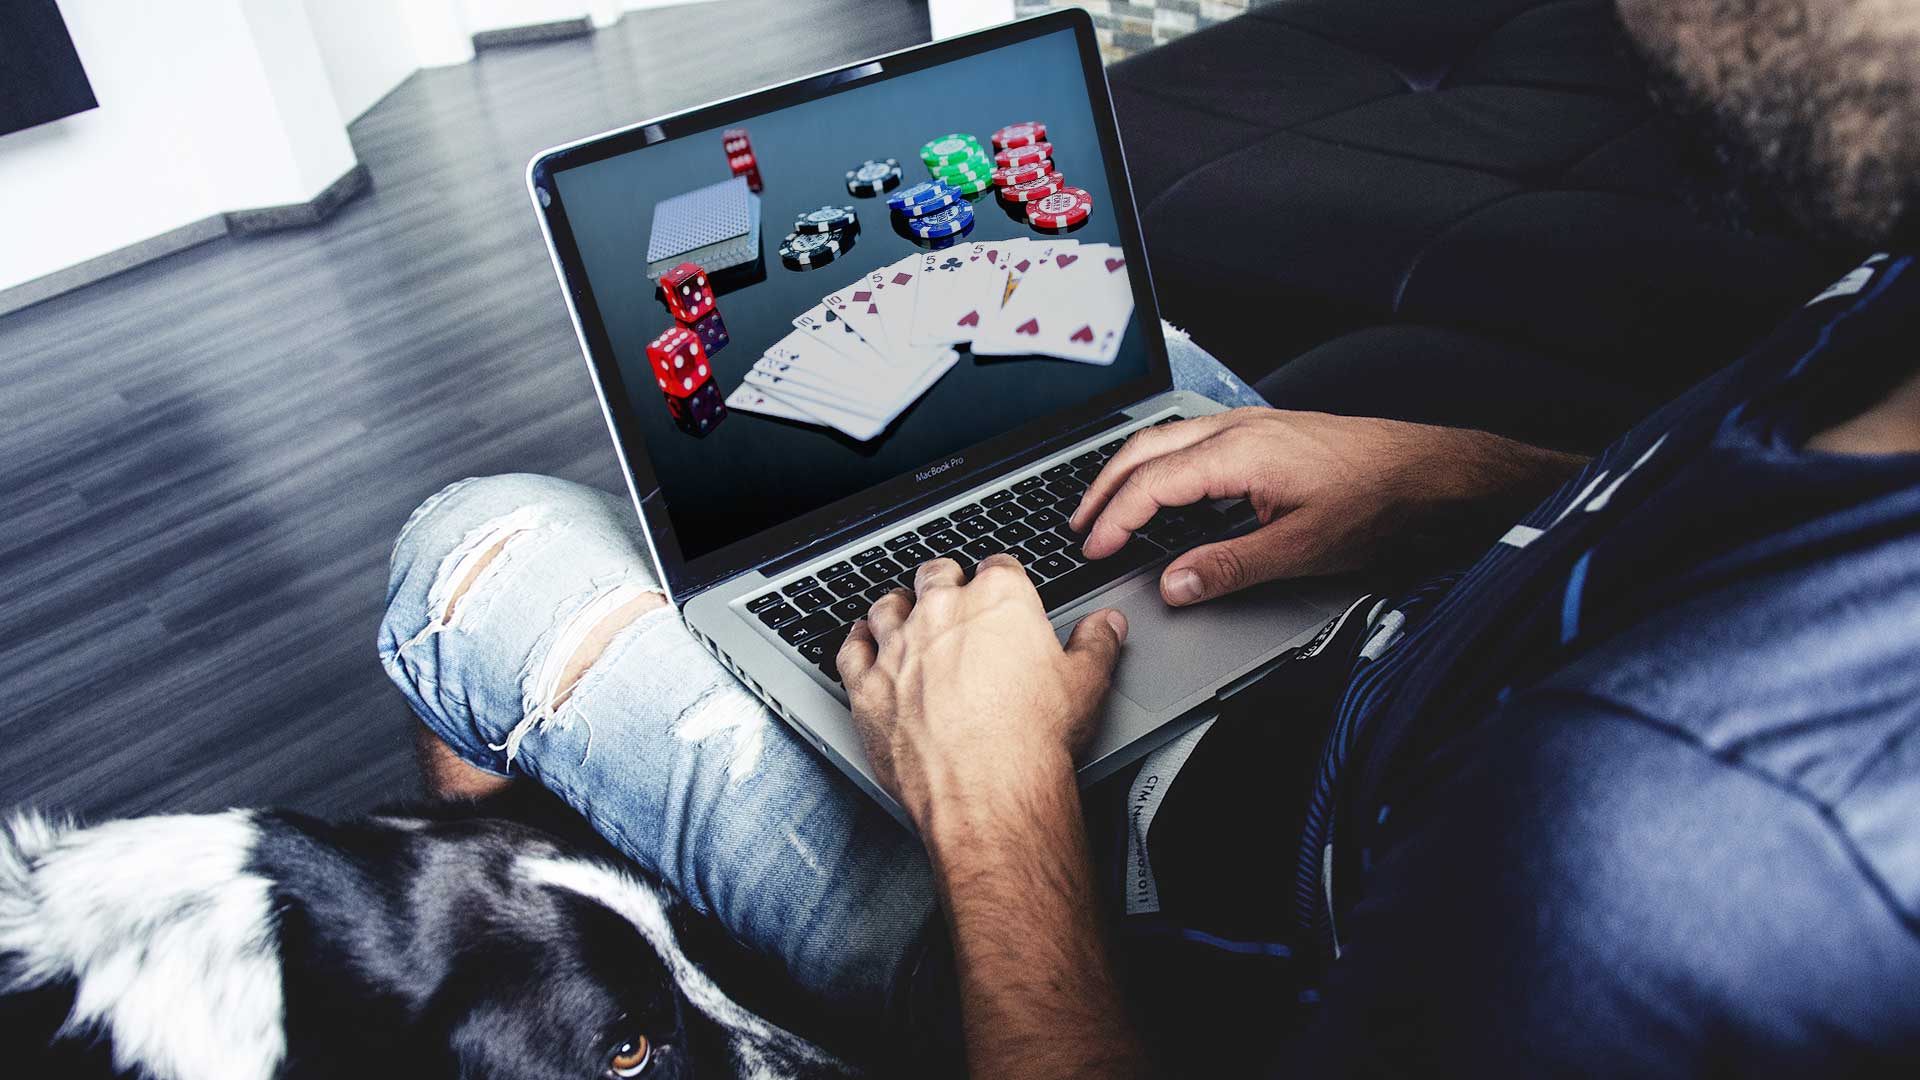 4 Creative Ways Online Casinos Are Beating Their Real-Life Counterparts